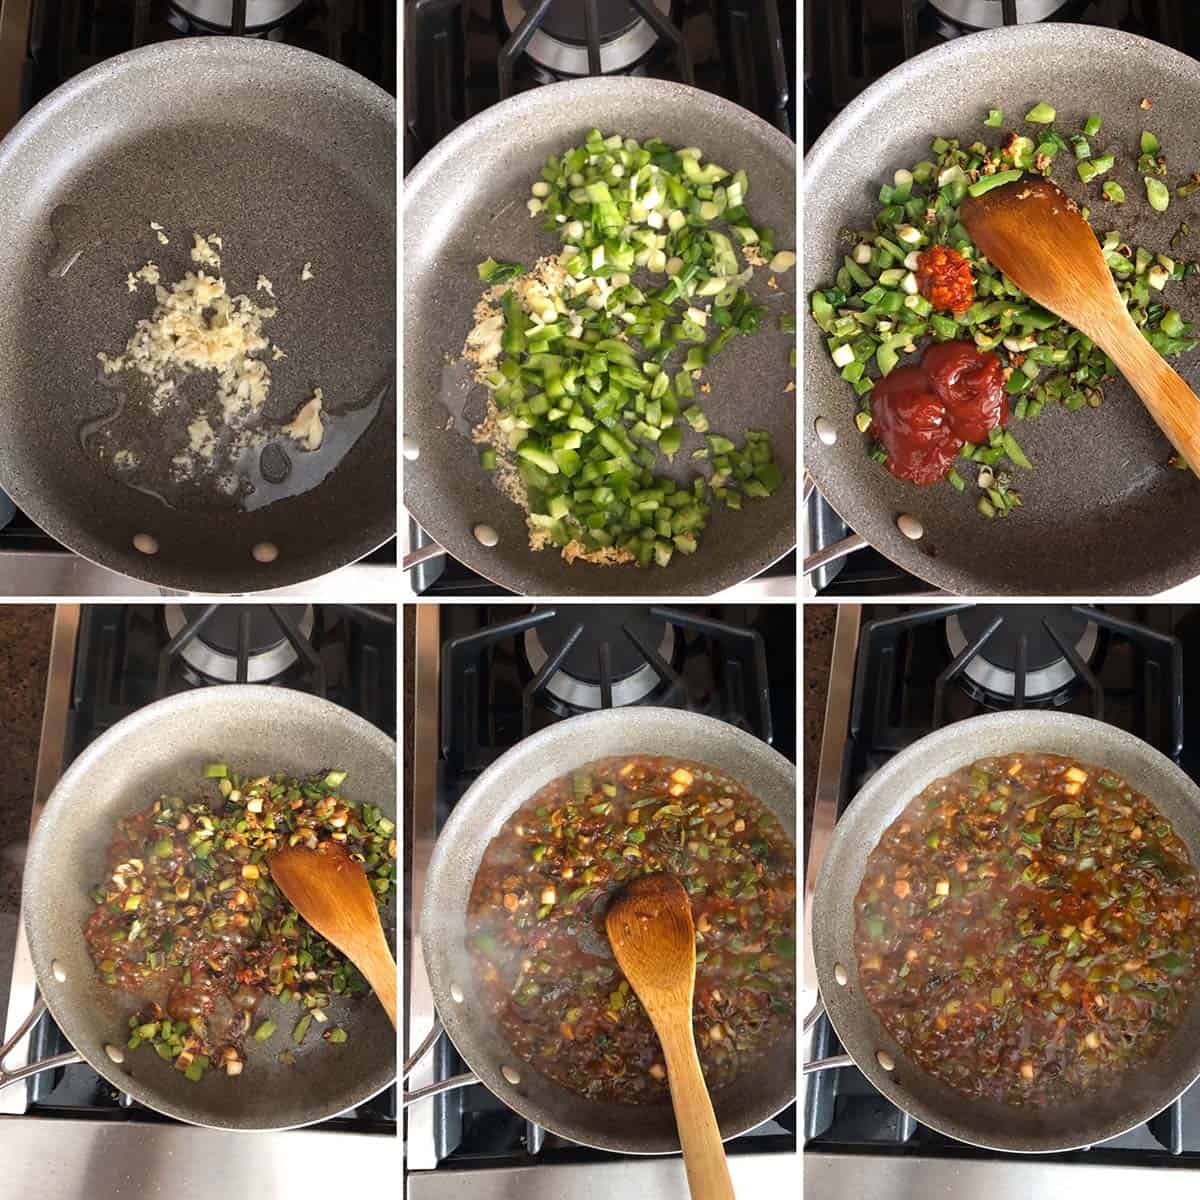 Step by Step photos showing how to make the sauce for manchurian recipe